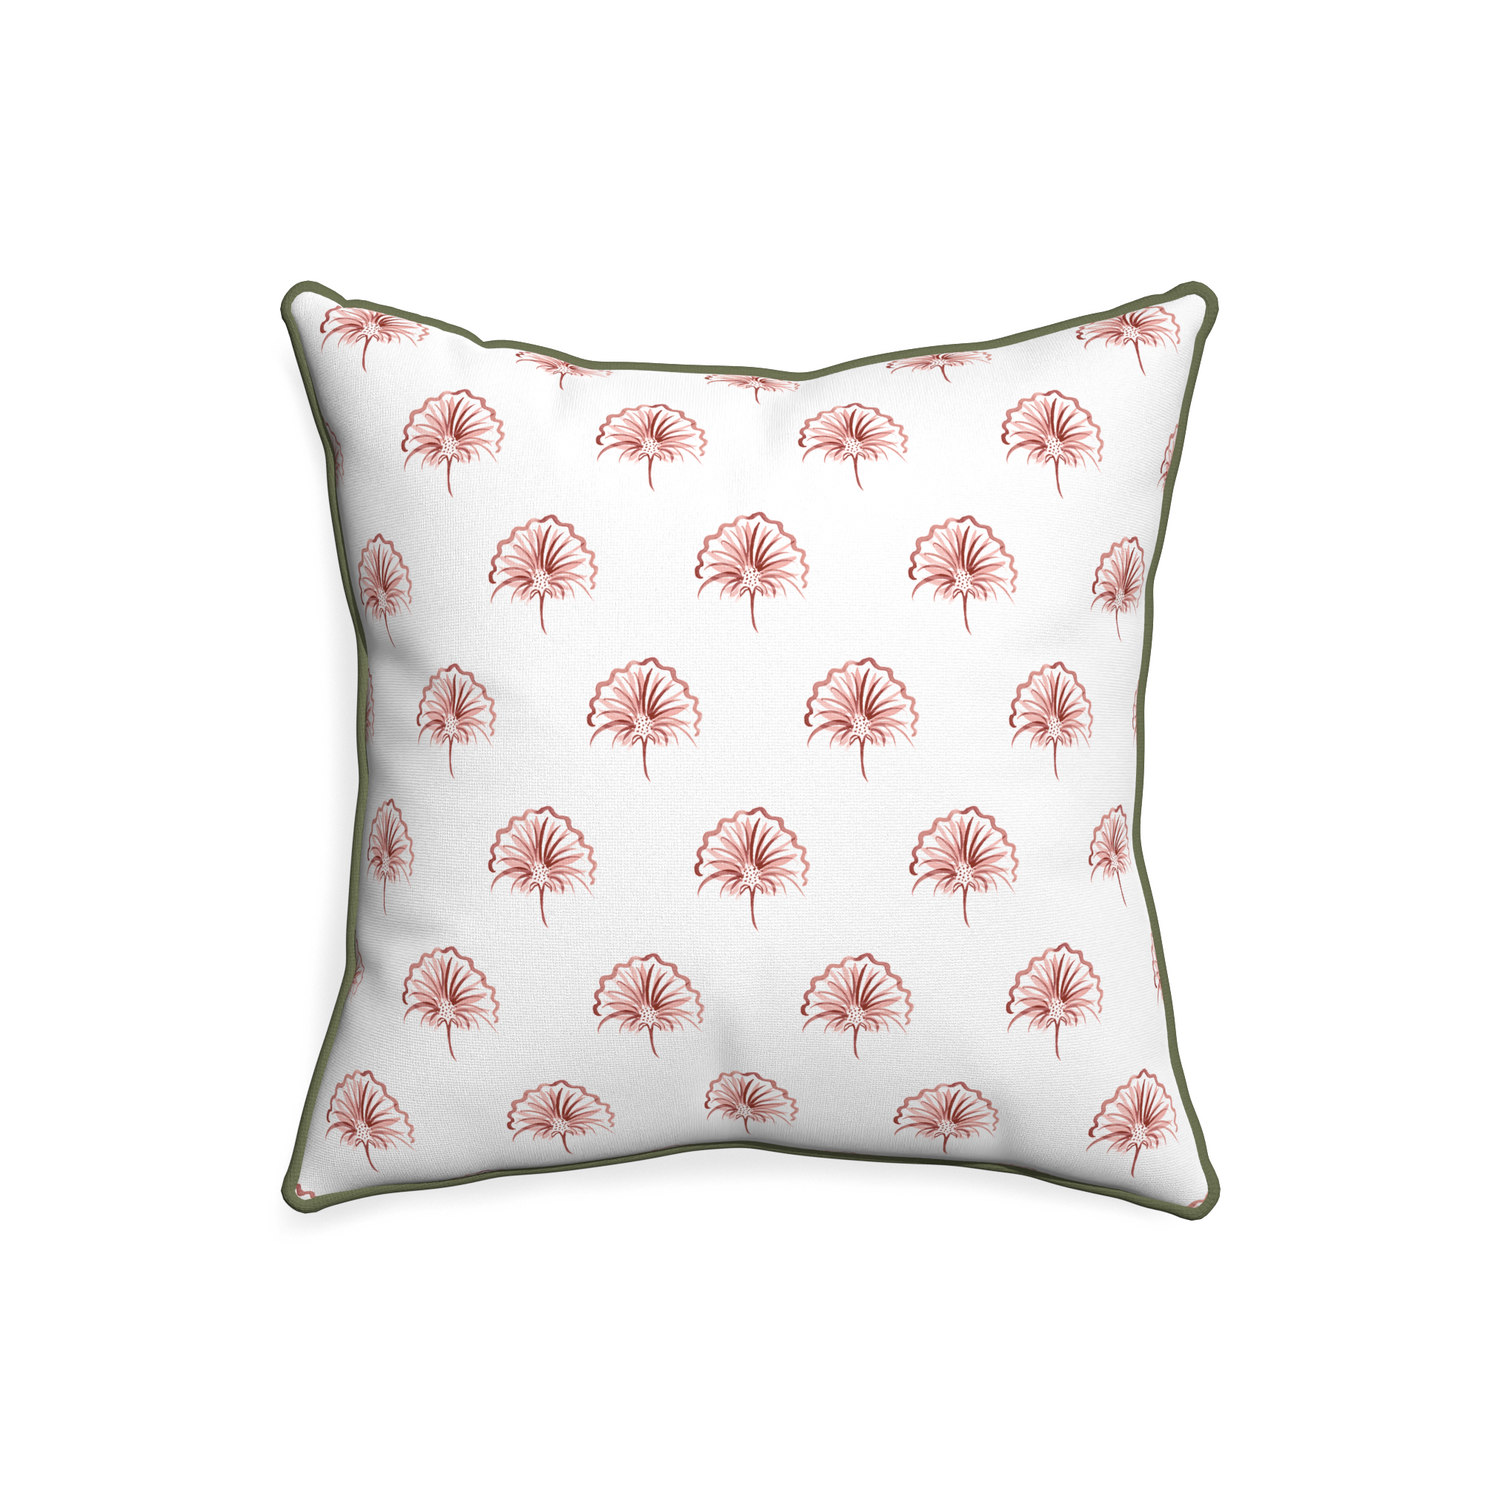 20-square penelope rose custom pillow with f piping on white background